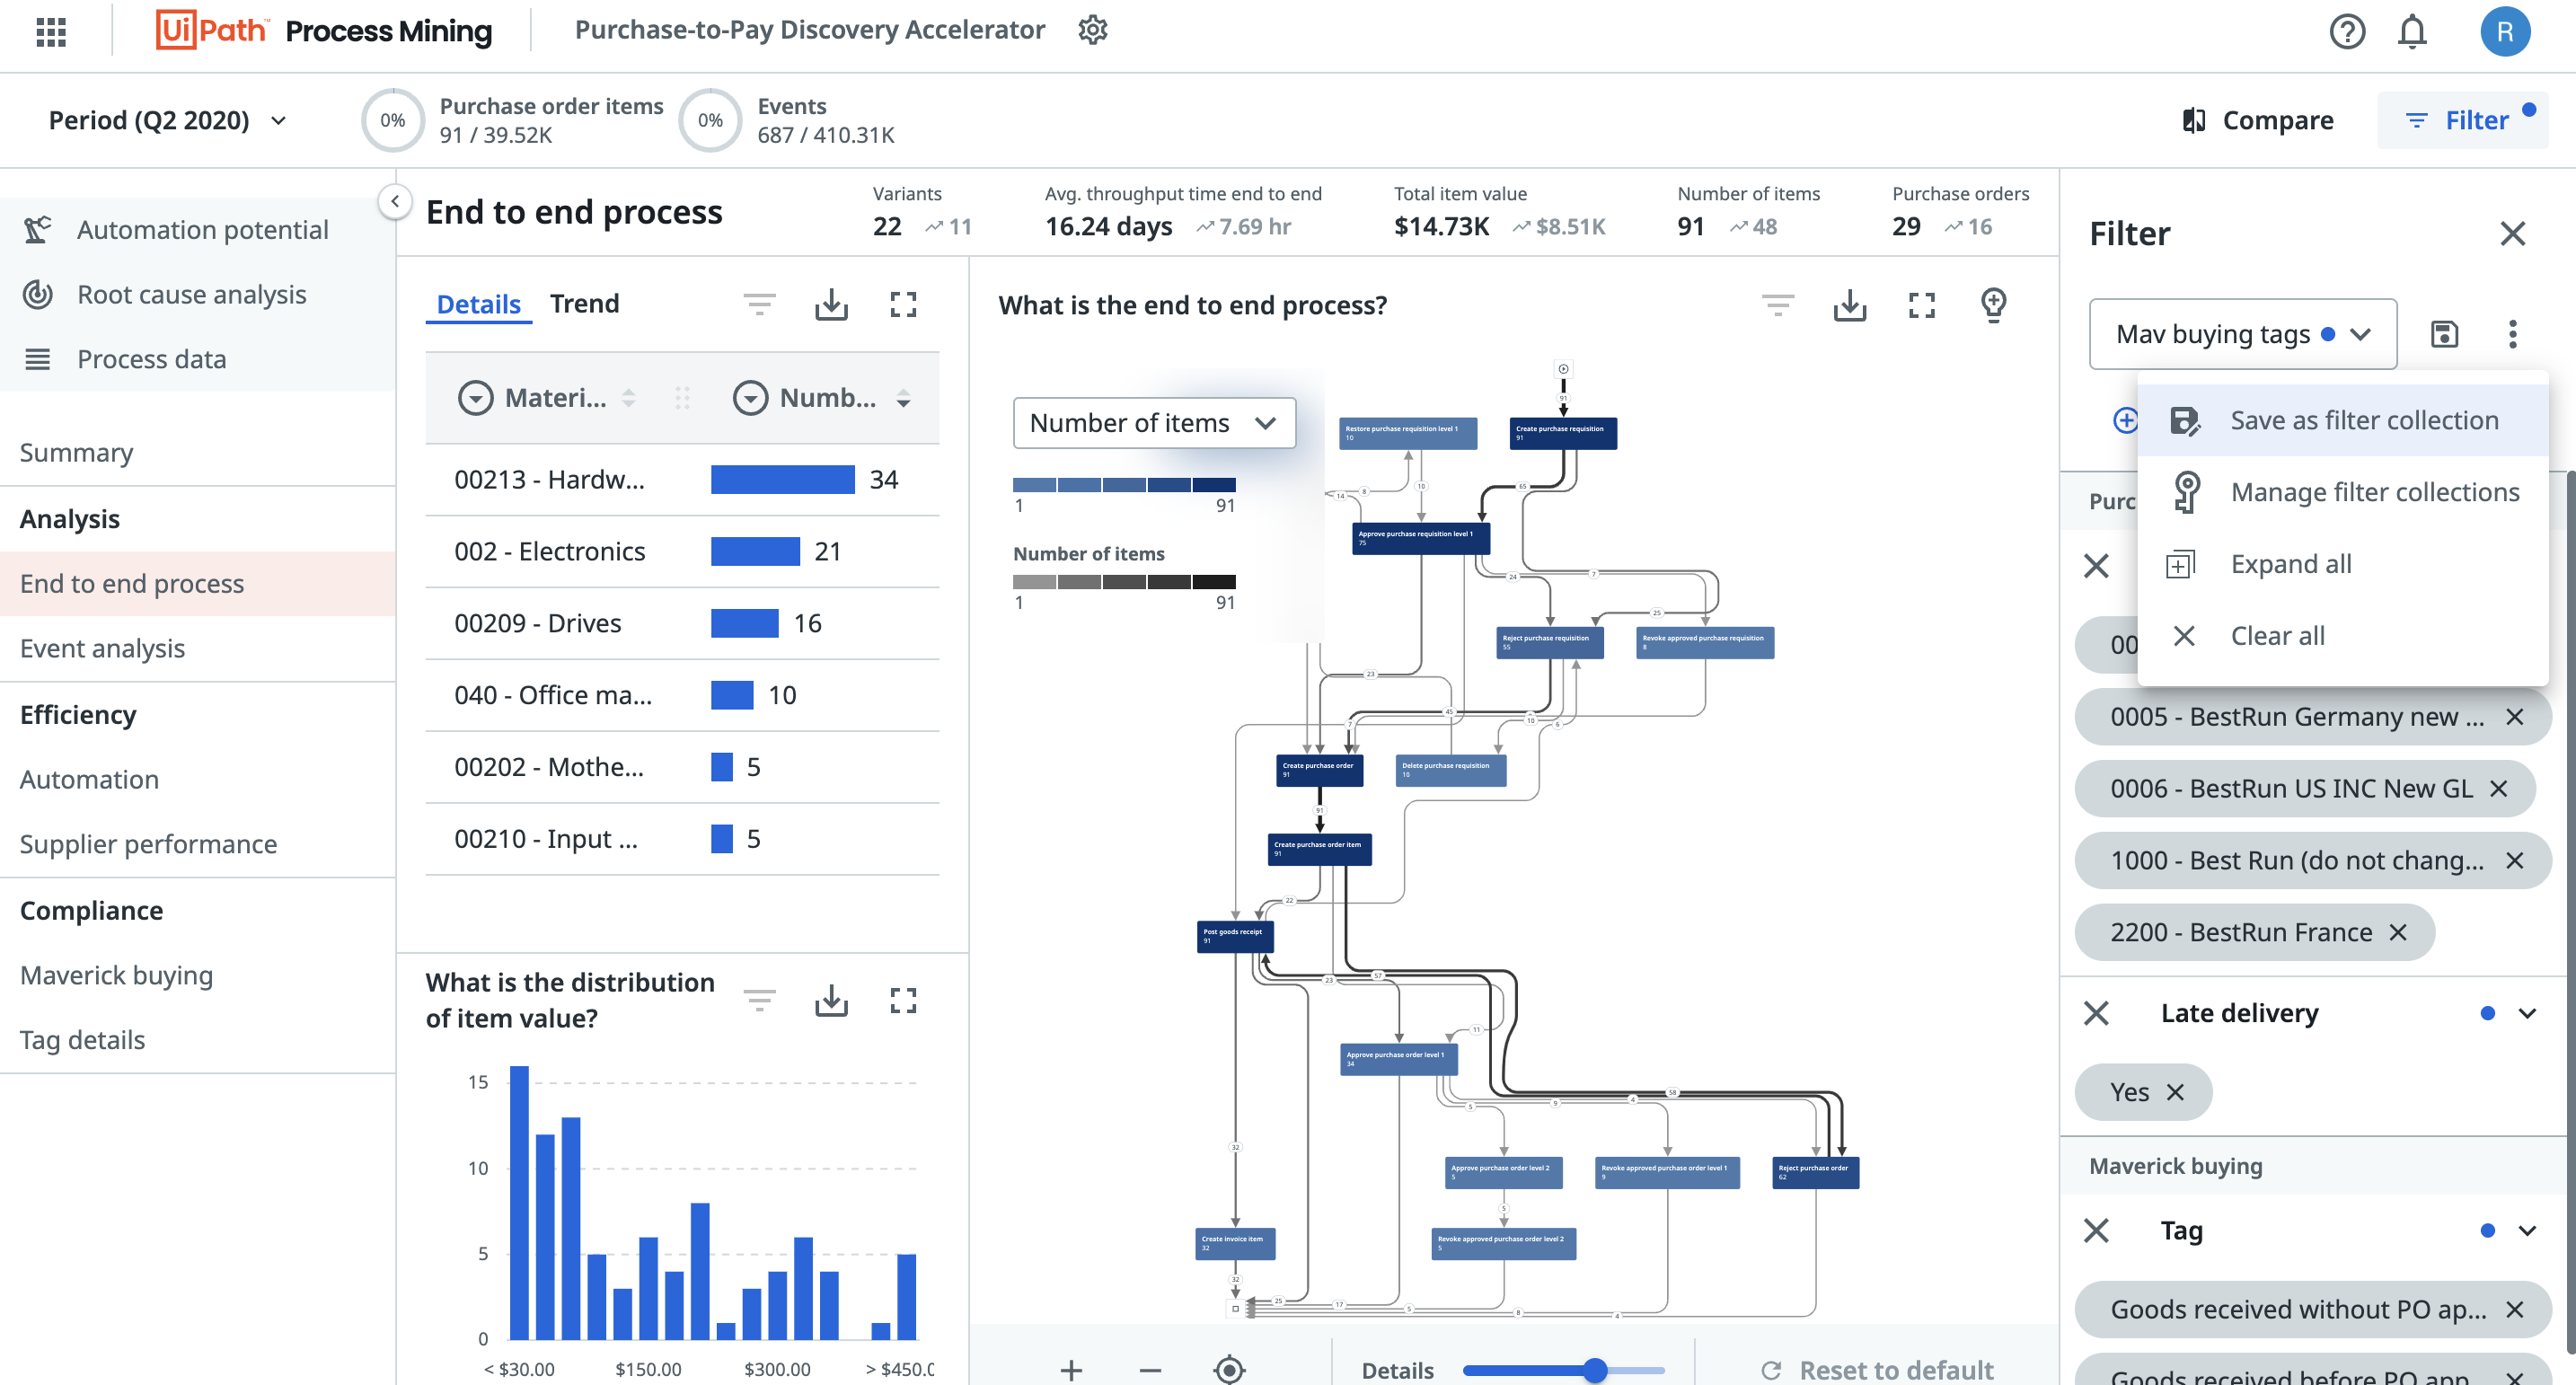 UiPath Process Mining Purchase-to-Pay Discovery Accelerator screenshot